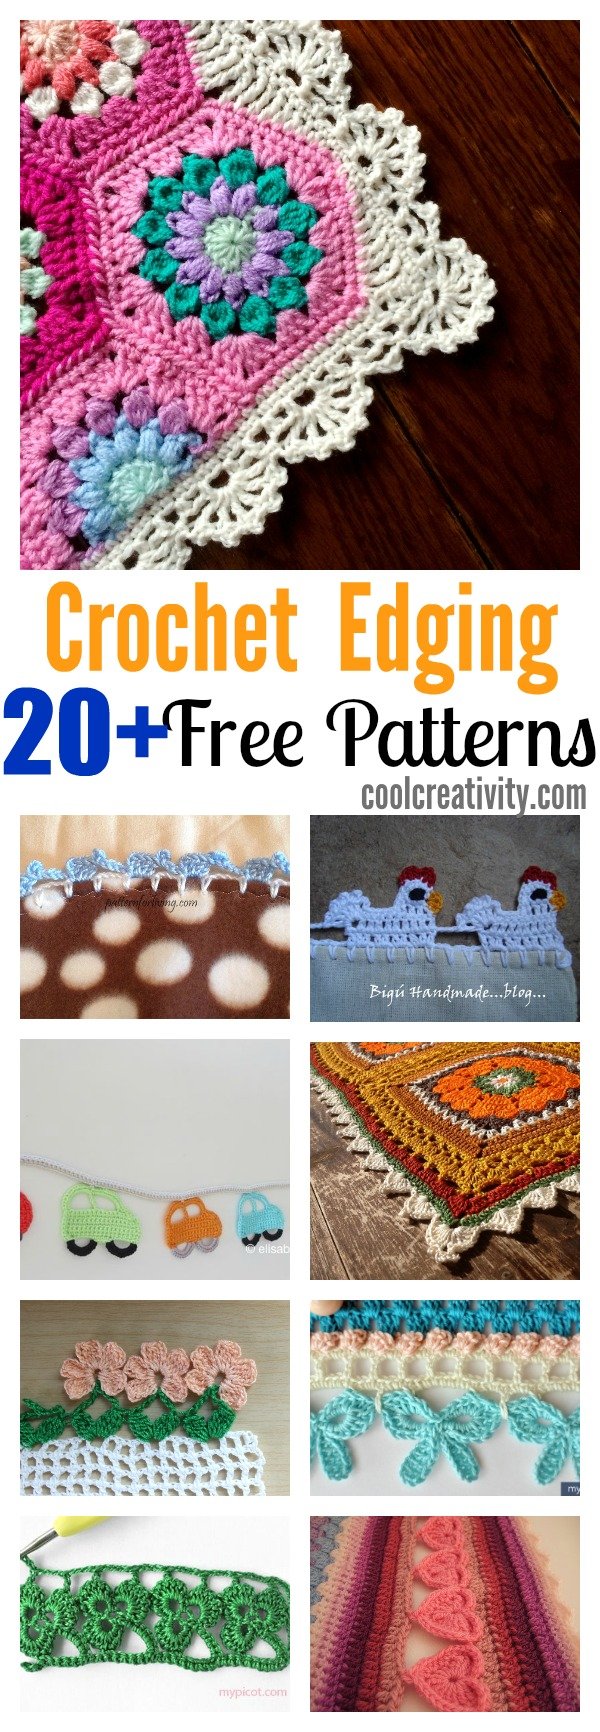 20 + Crochet Free Edging Patterns You Should Know